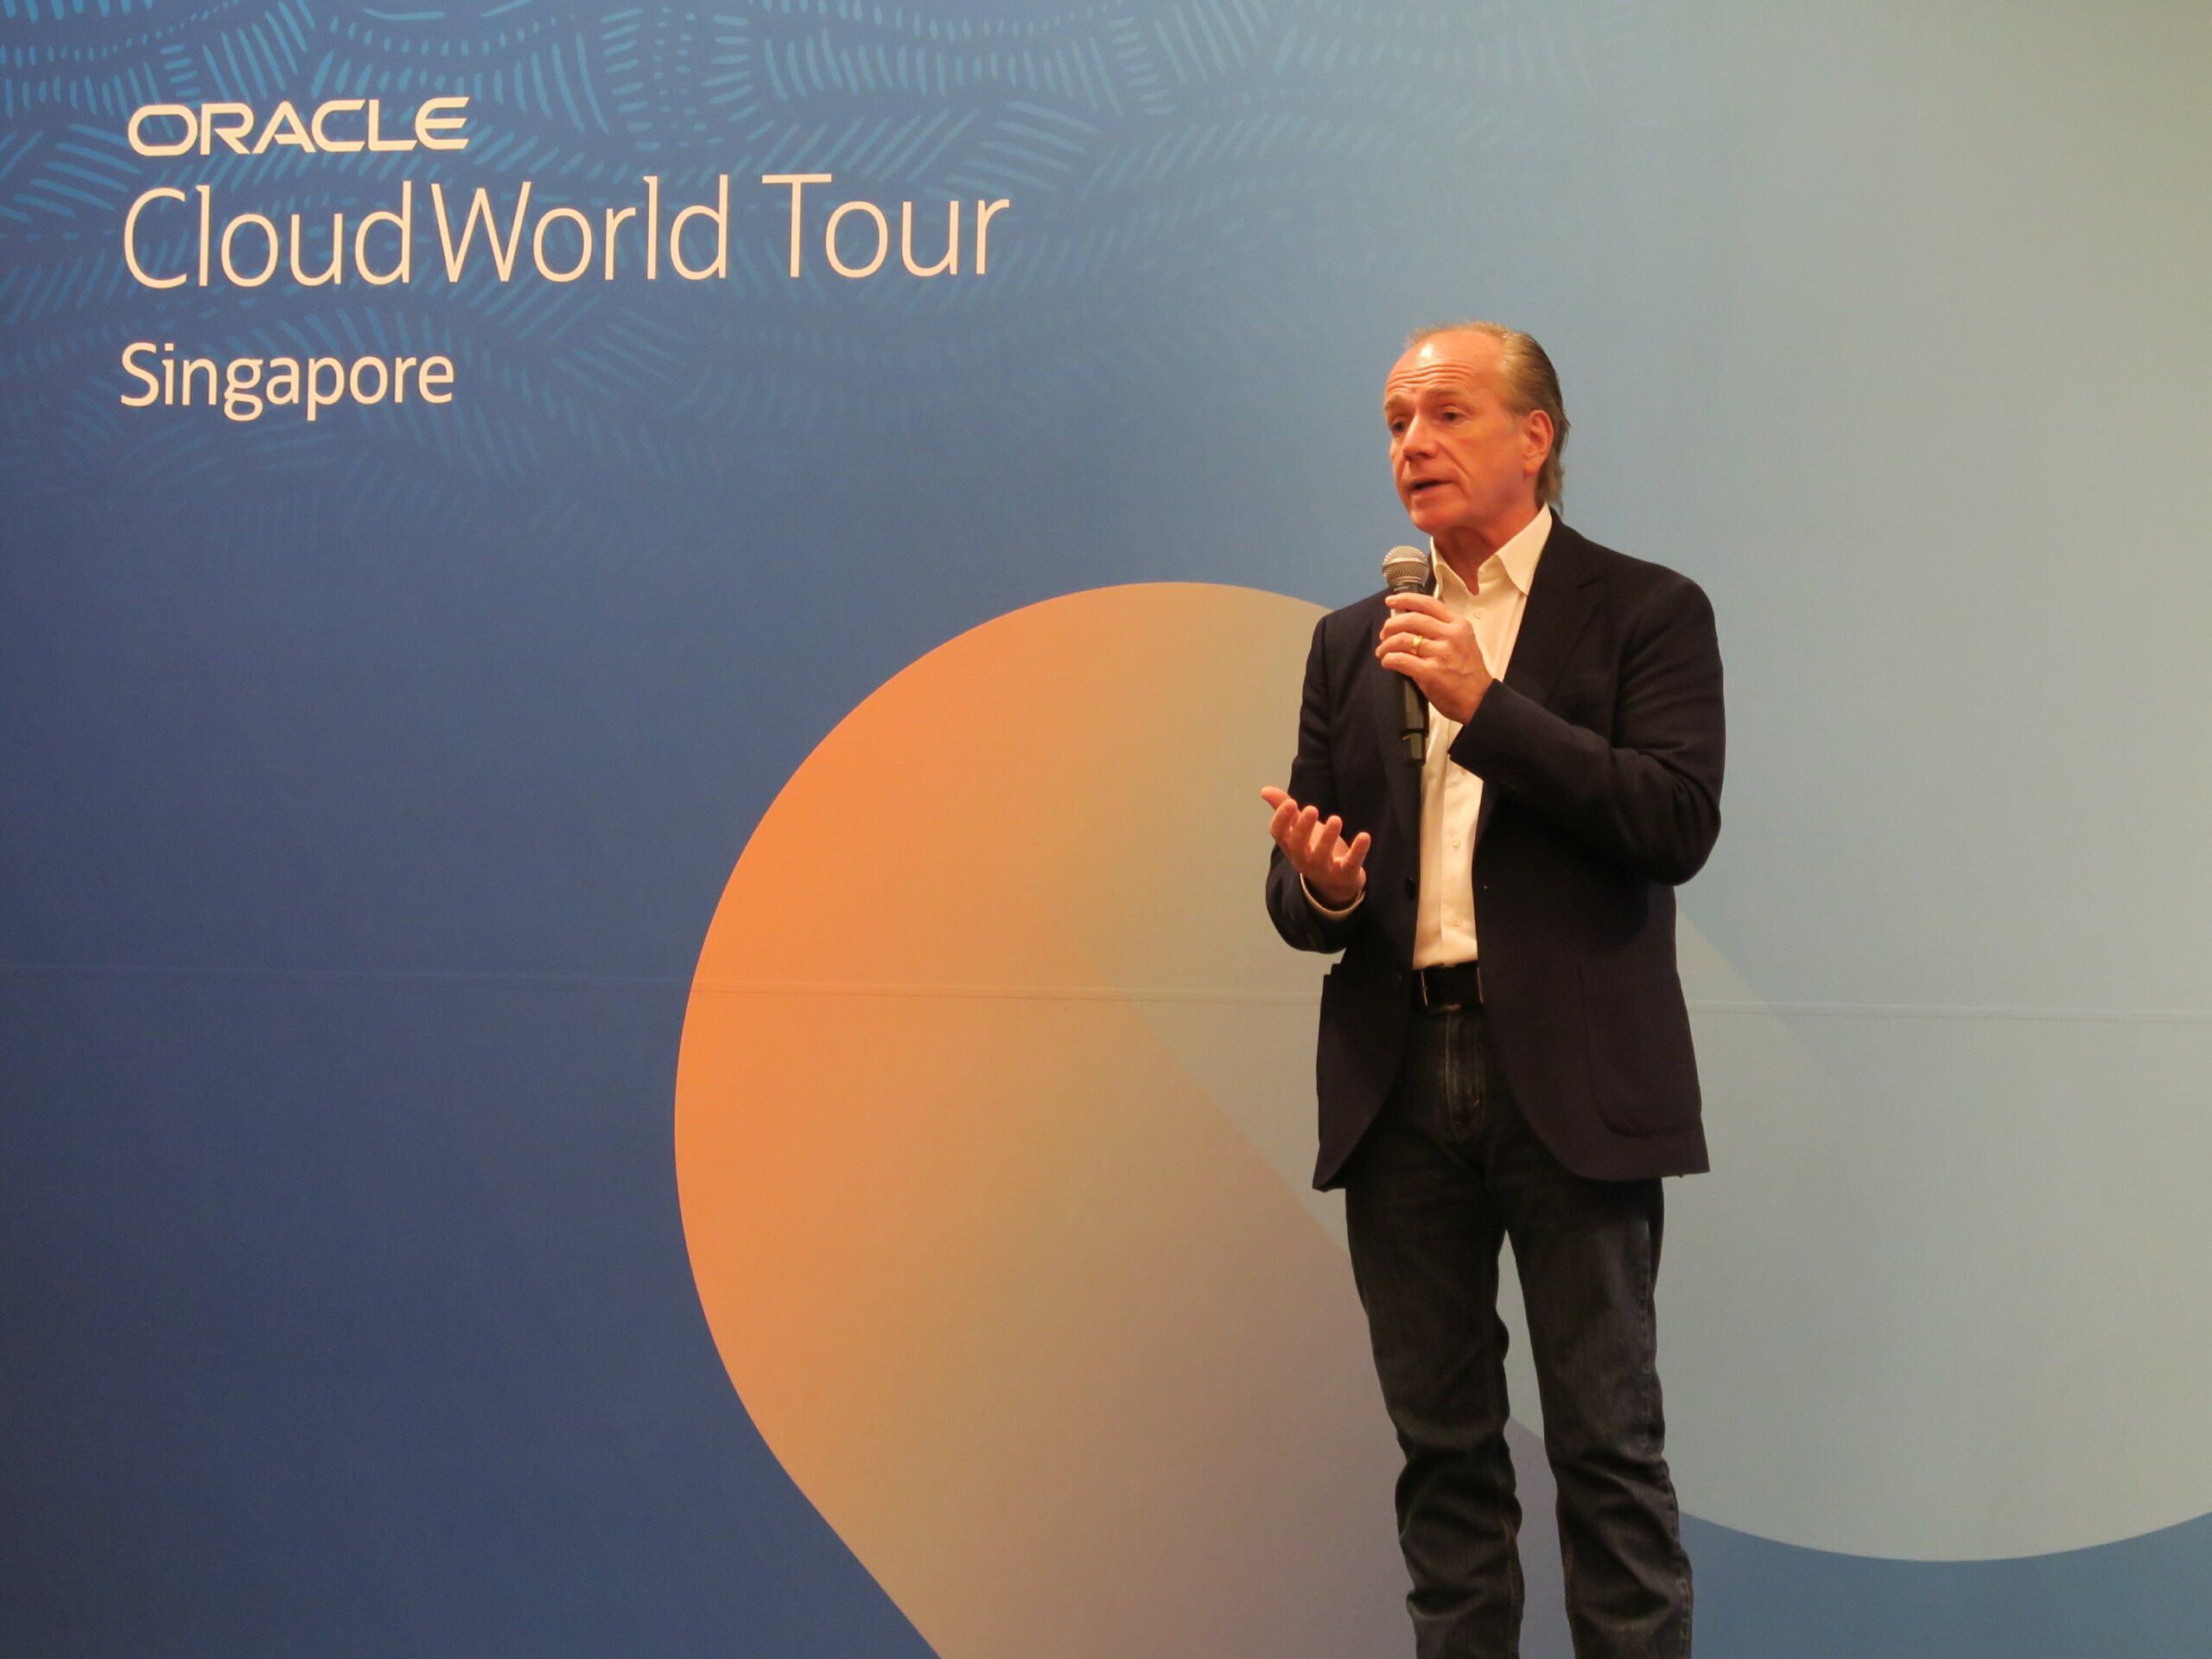 Embracing the Oracle Cloud wave across the APAC region in a multicloud world